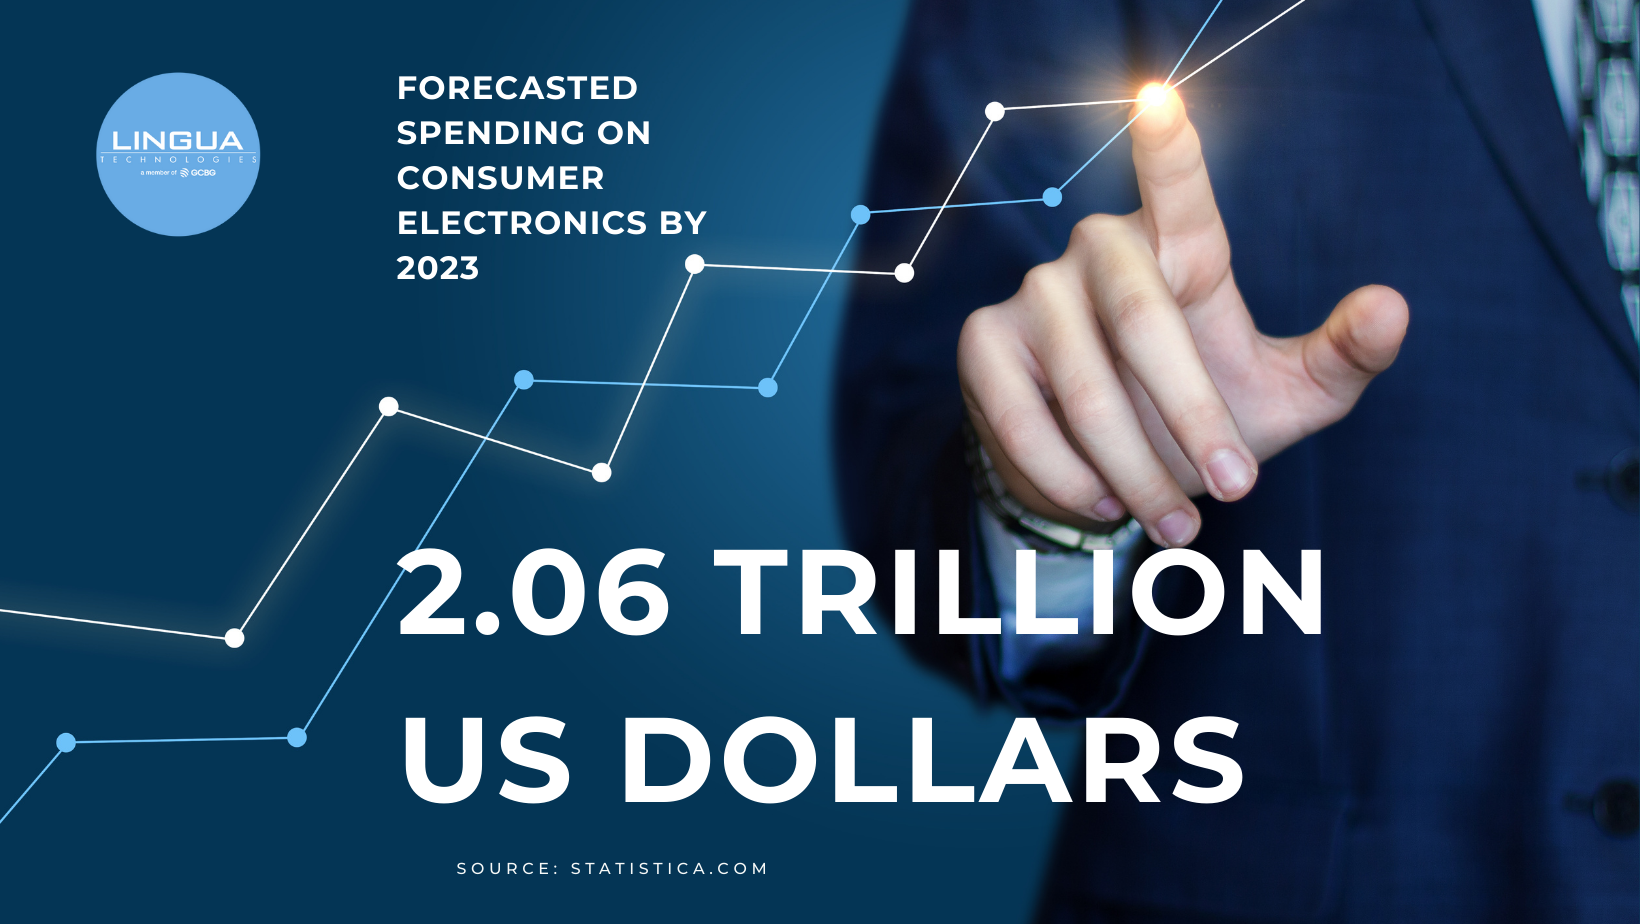 Consumer Electronic Industry global growth forecast